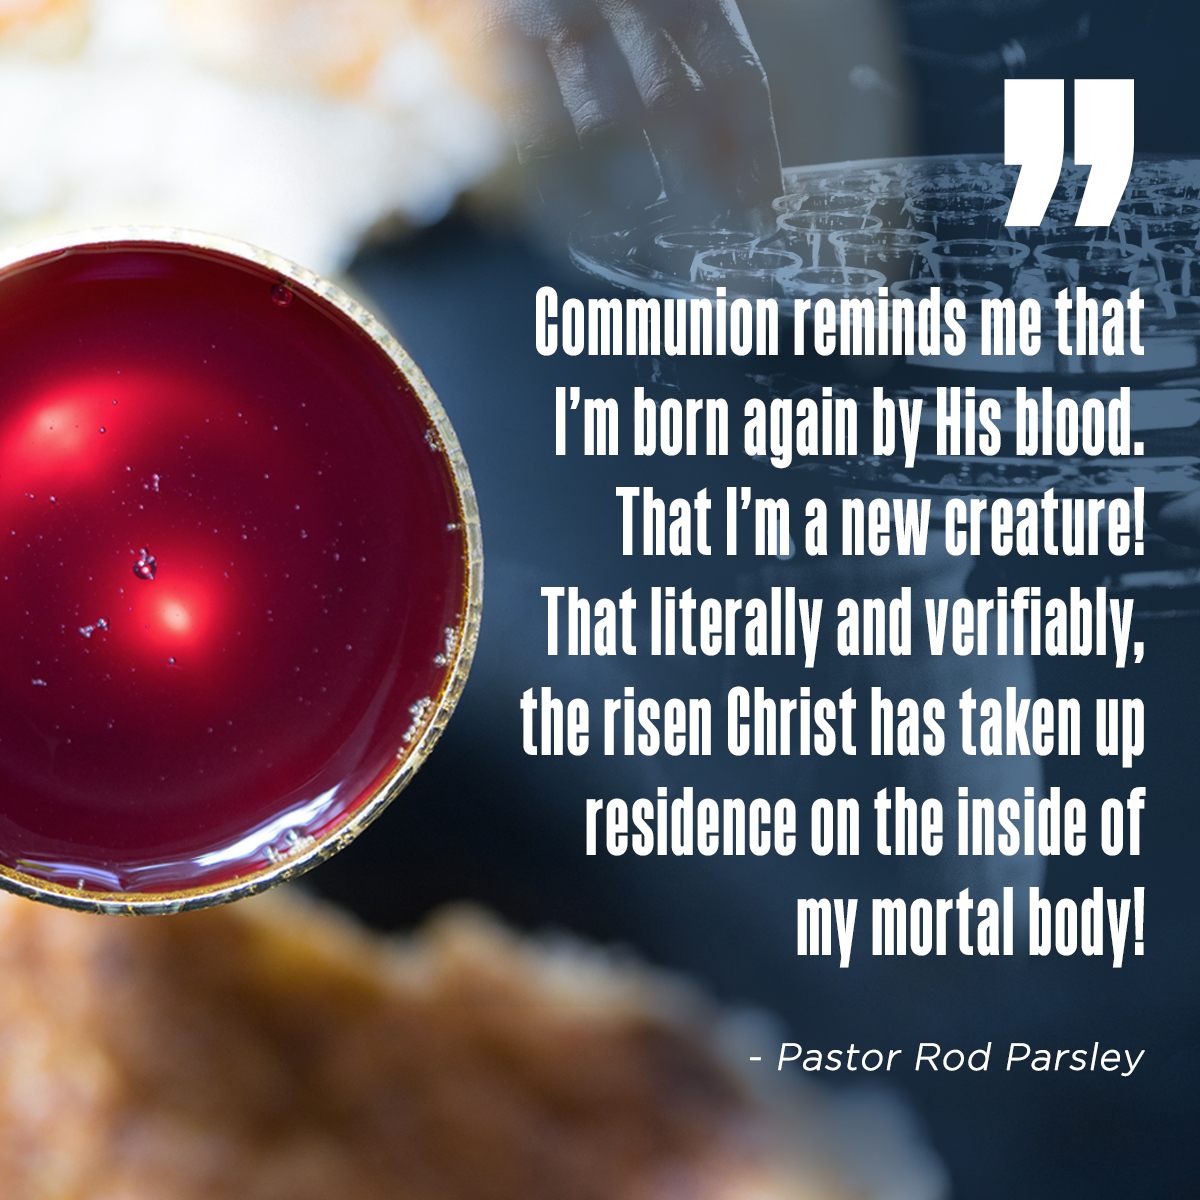 “Communion reminds me that I’m born again by His blood.  That I’m a new creature! That literally and verifiable, the risen Christ has taken up residence on the inside of my mortal body!Communion reminds me that I’m born again by His blood.  That I’m a new creature! That literally and verifiable, the risen Christ has taken up residence on the inside of my mortal body!” – Pastor Rod Parsley